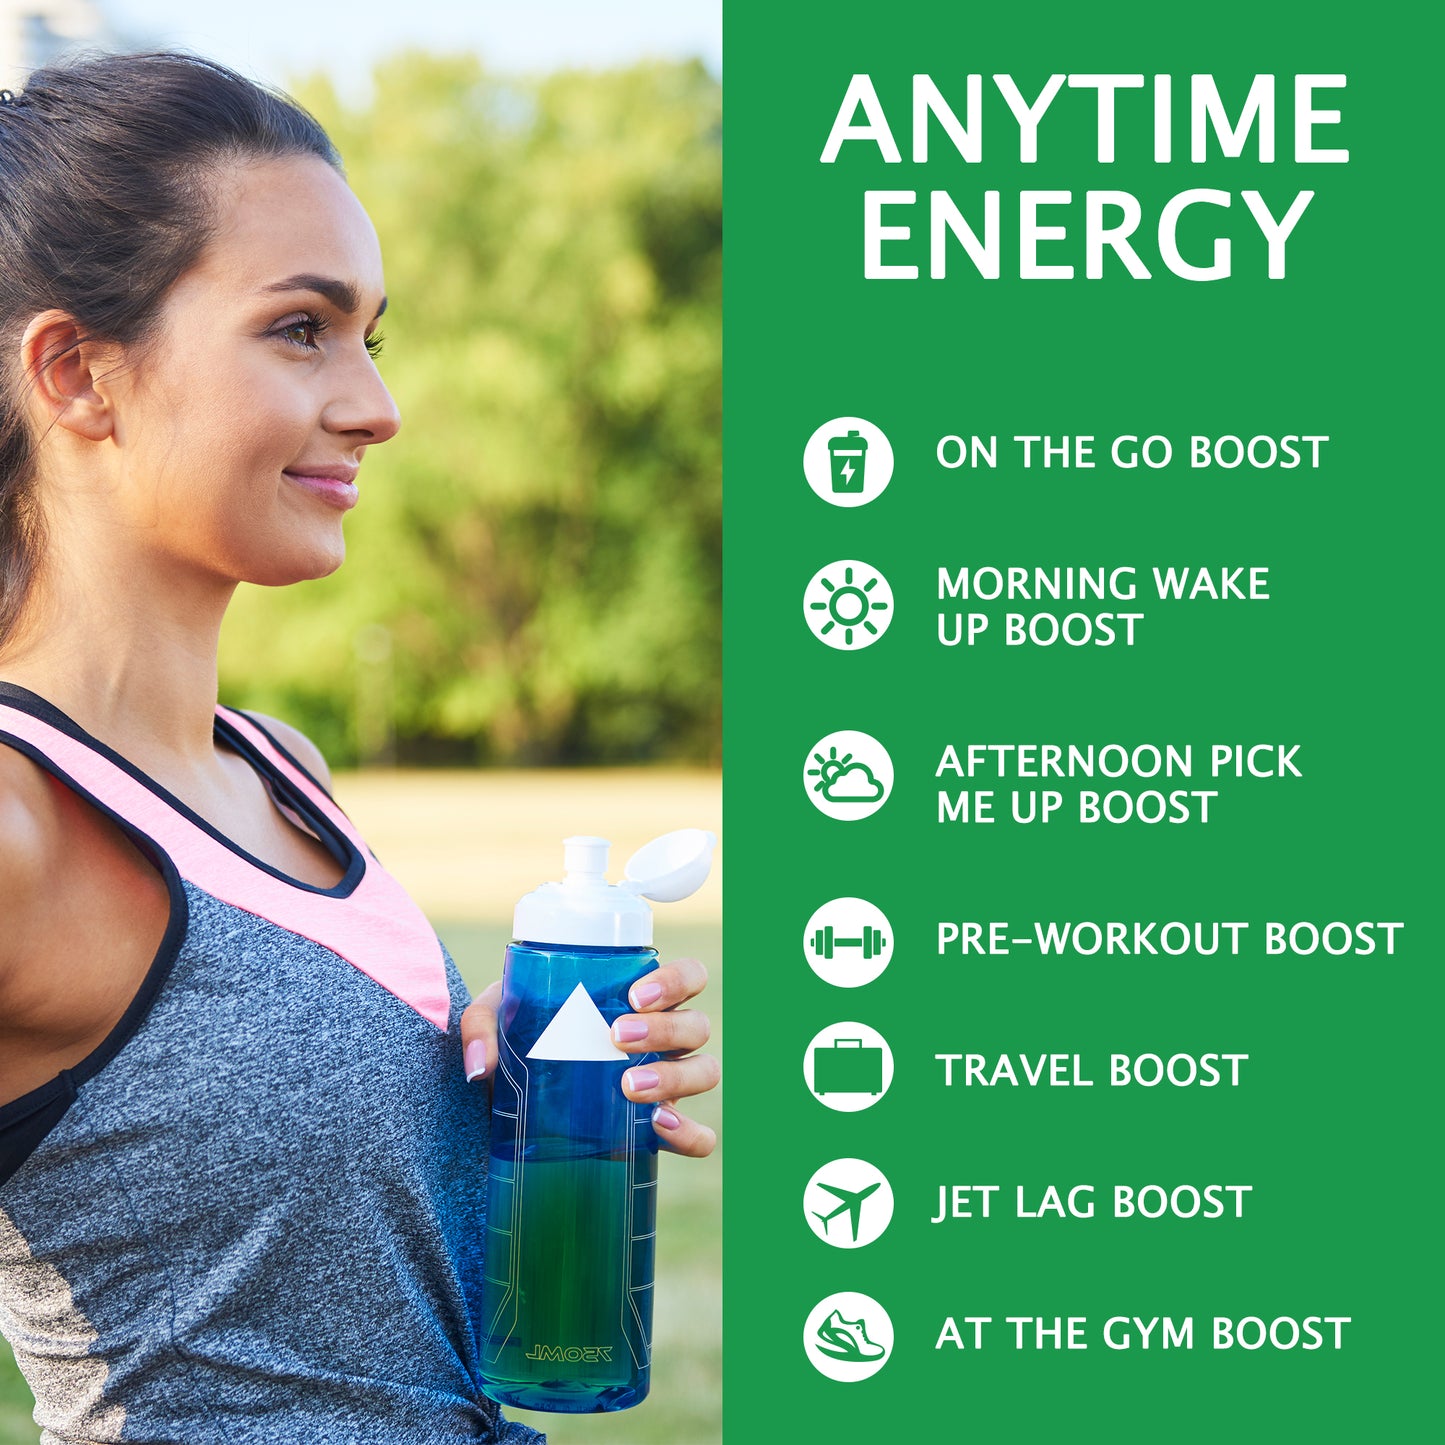 Let'z Go Boost gives you Anytime Energy, without the jitters or crash